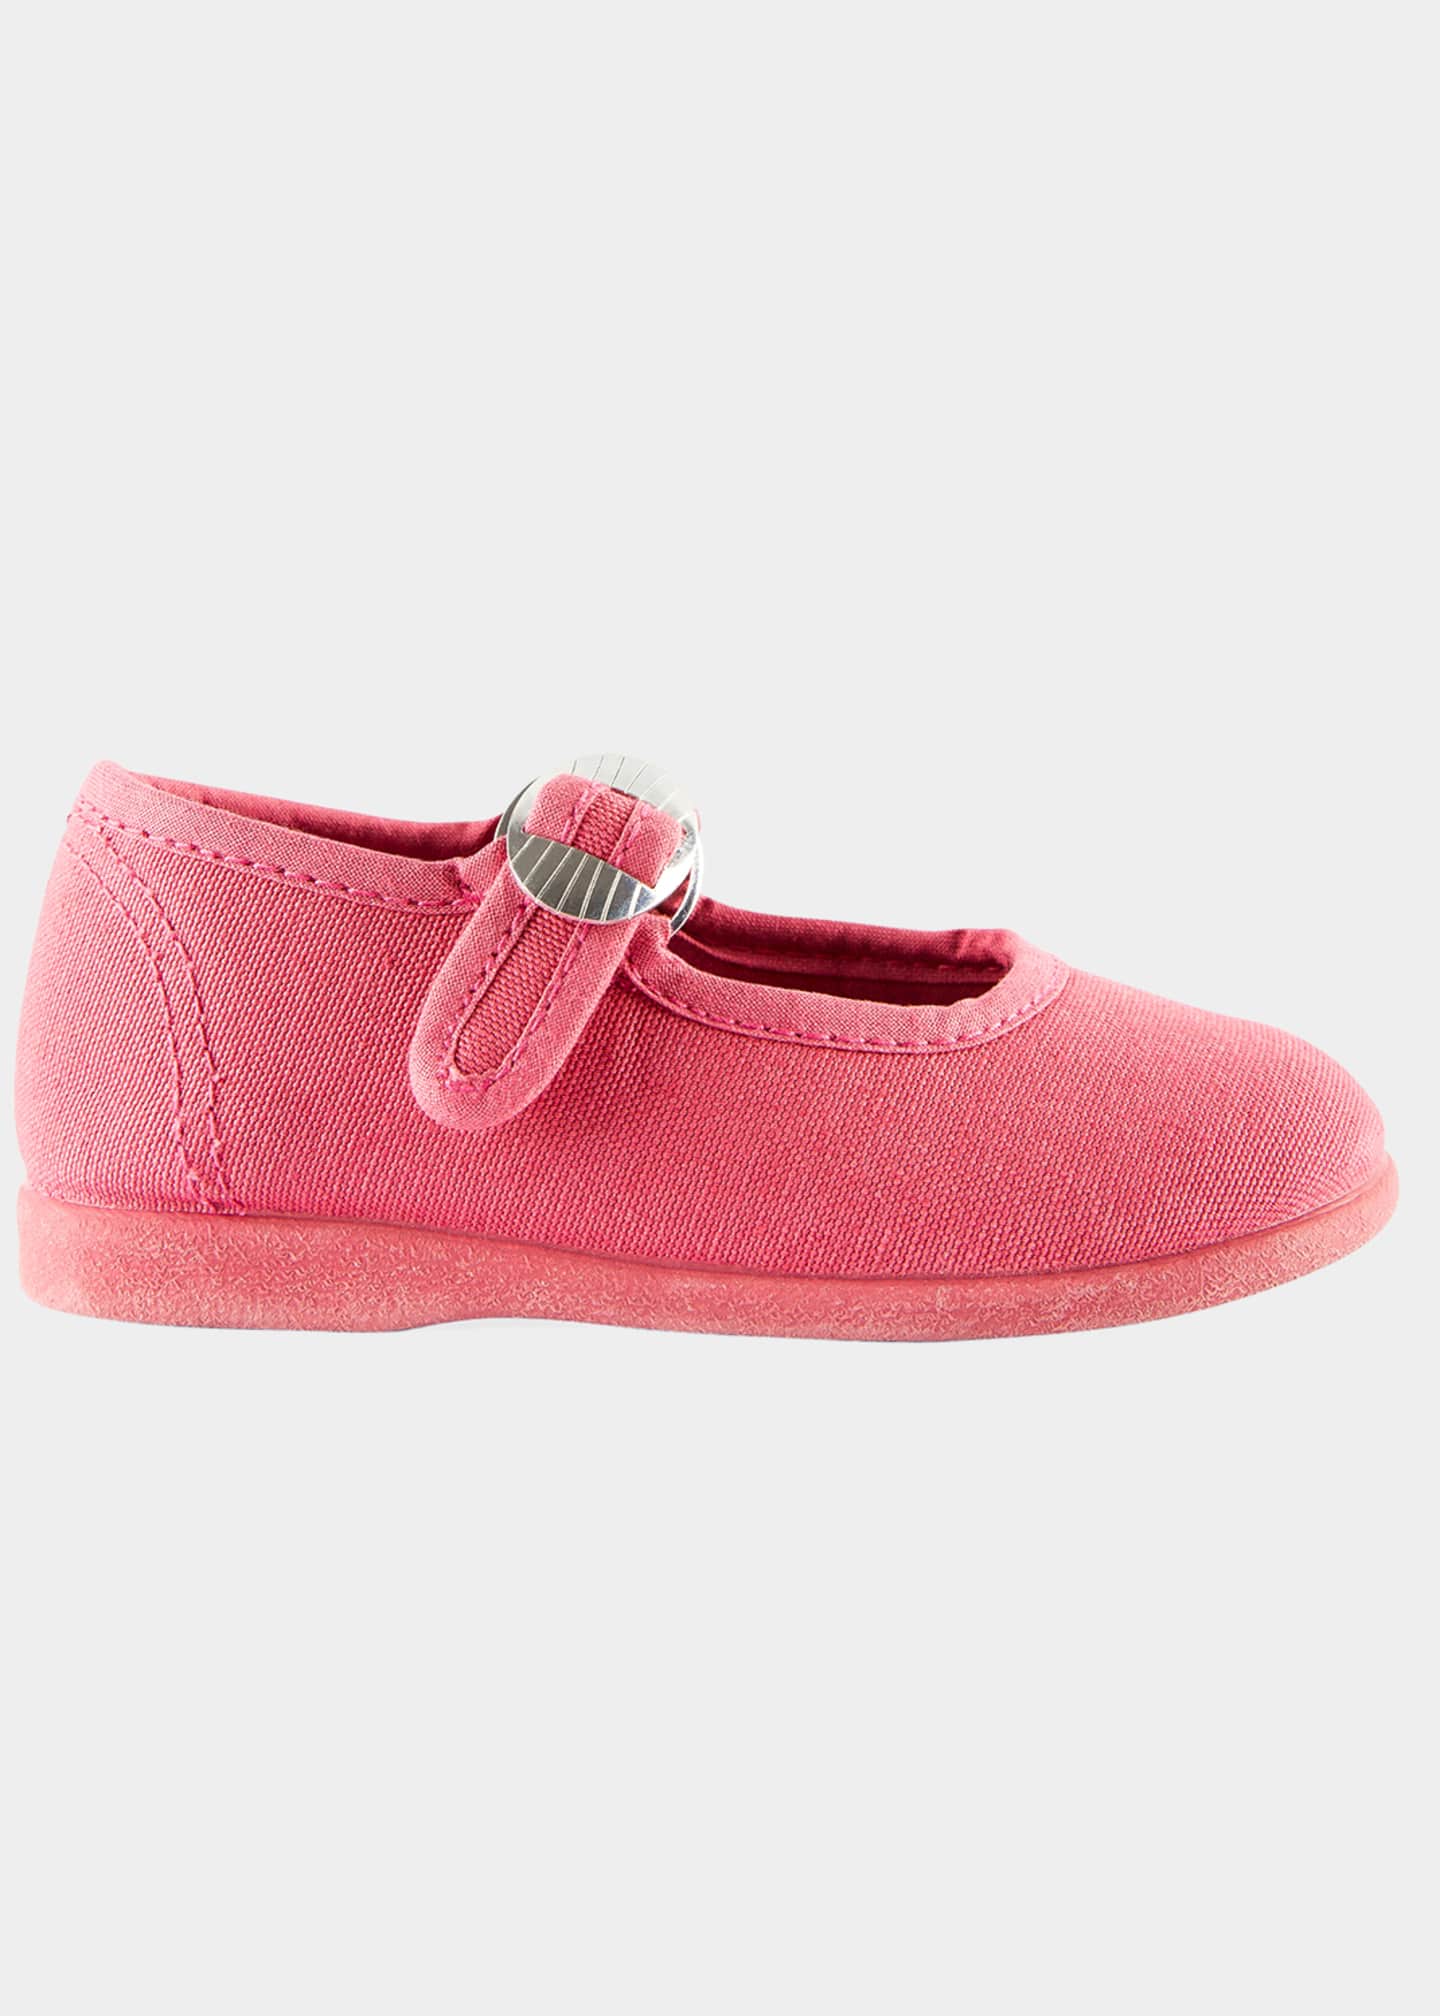 Namoo Girl's Cotton Canvas Buckle Mary Jane, Toddler/Kids - Bergdorf ...